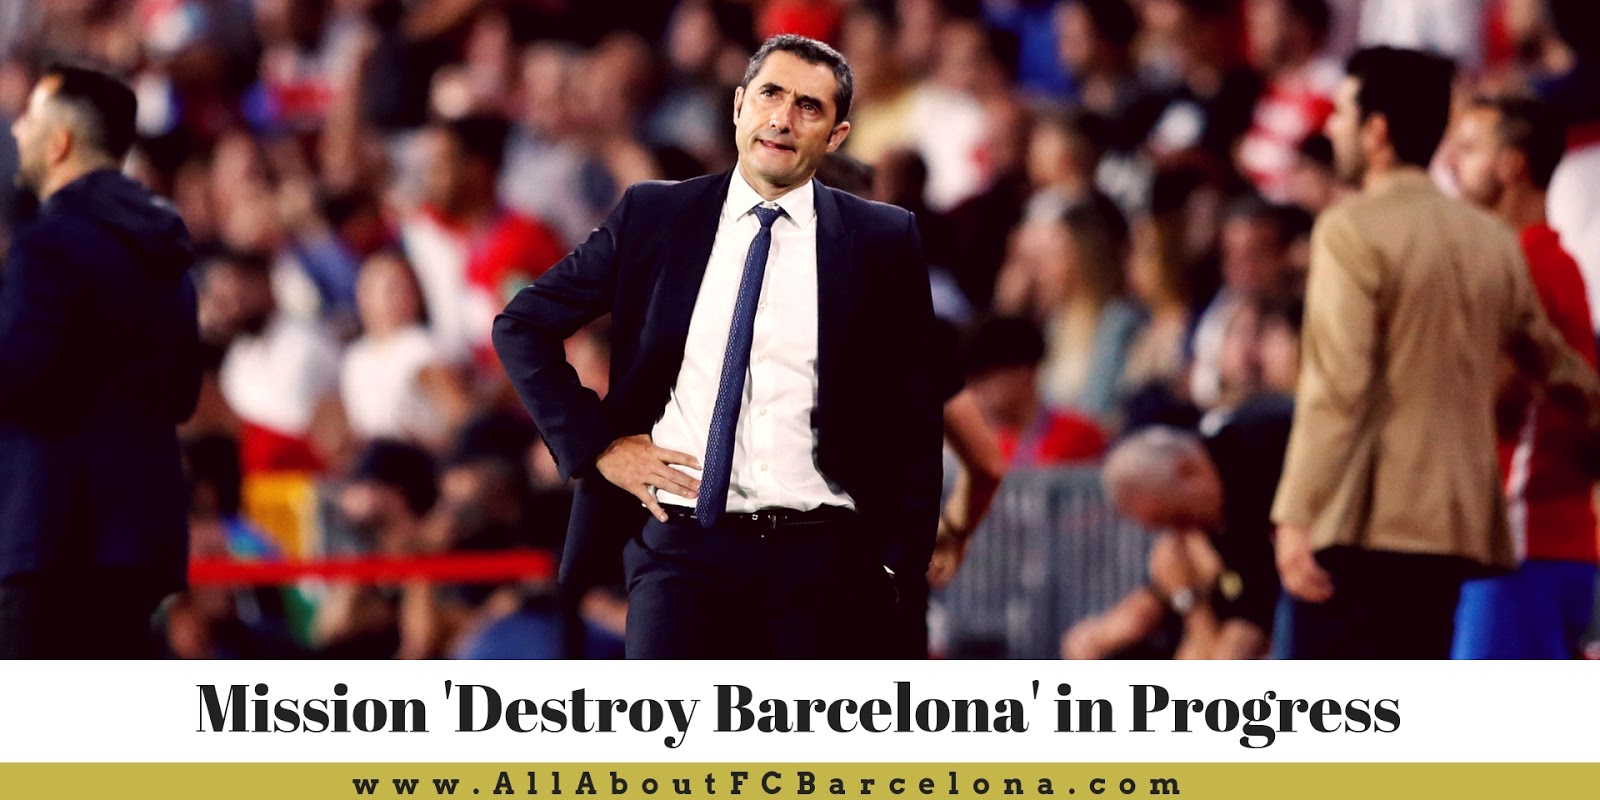 Will Valverde Really be able to Solve Barcelona's Latest Footballing Crisis? #Barca #Messi #ValverdeOUT